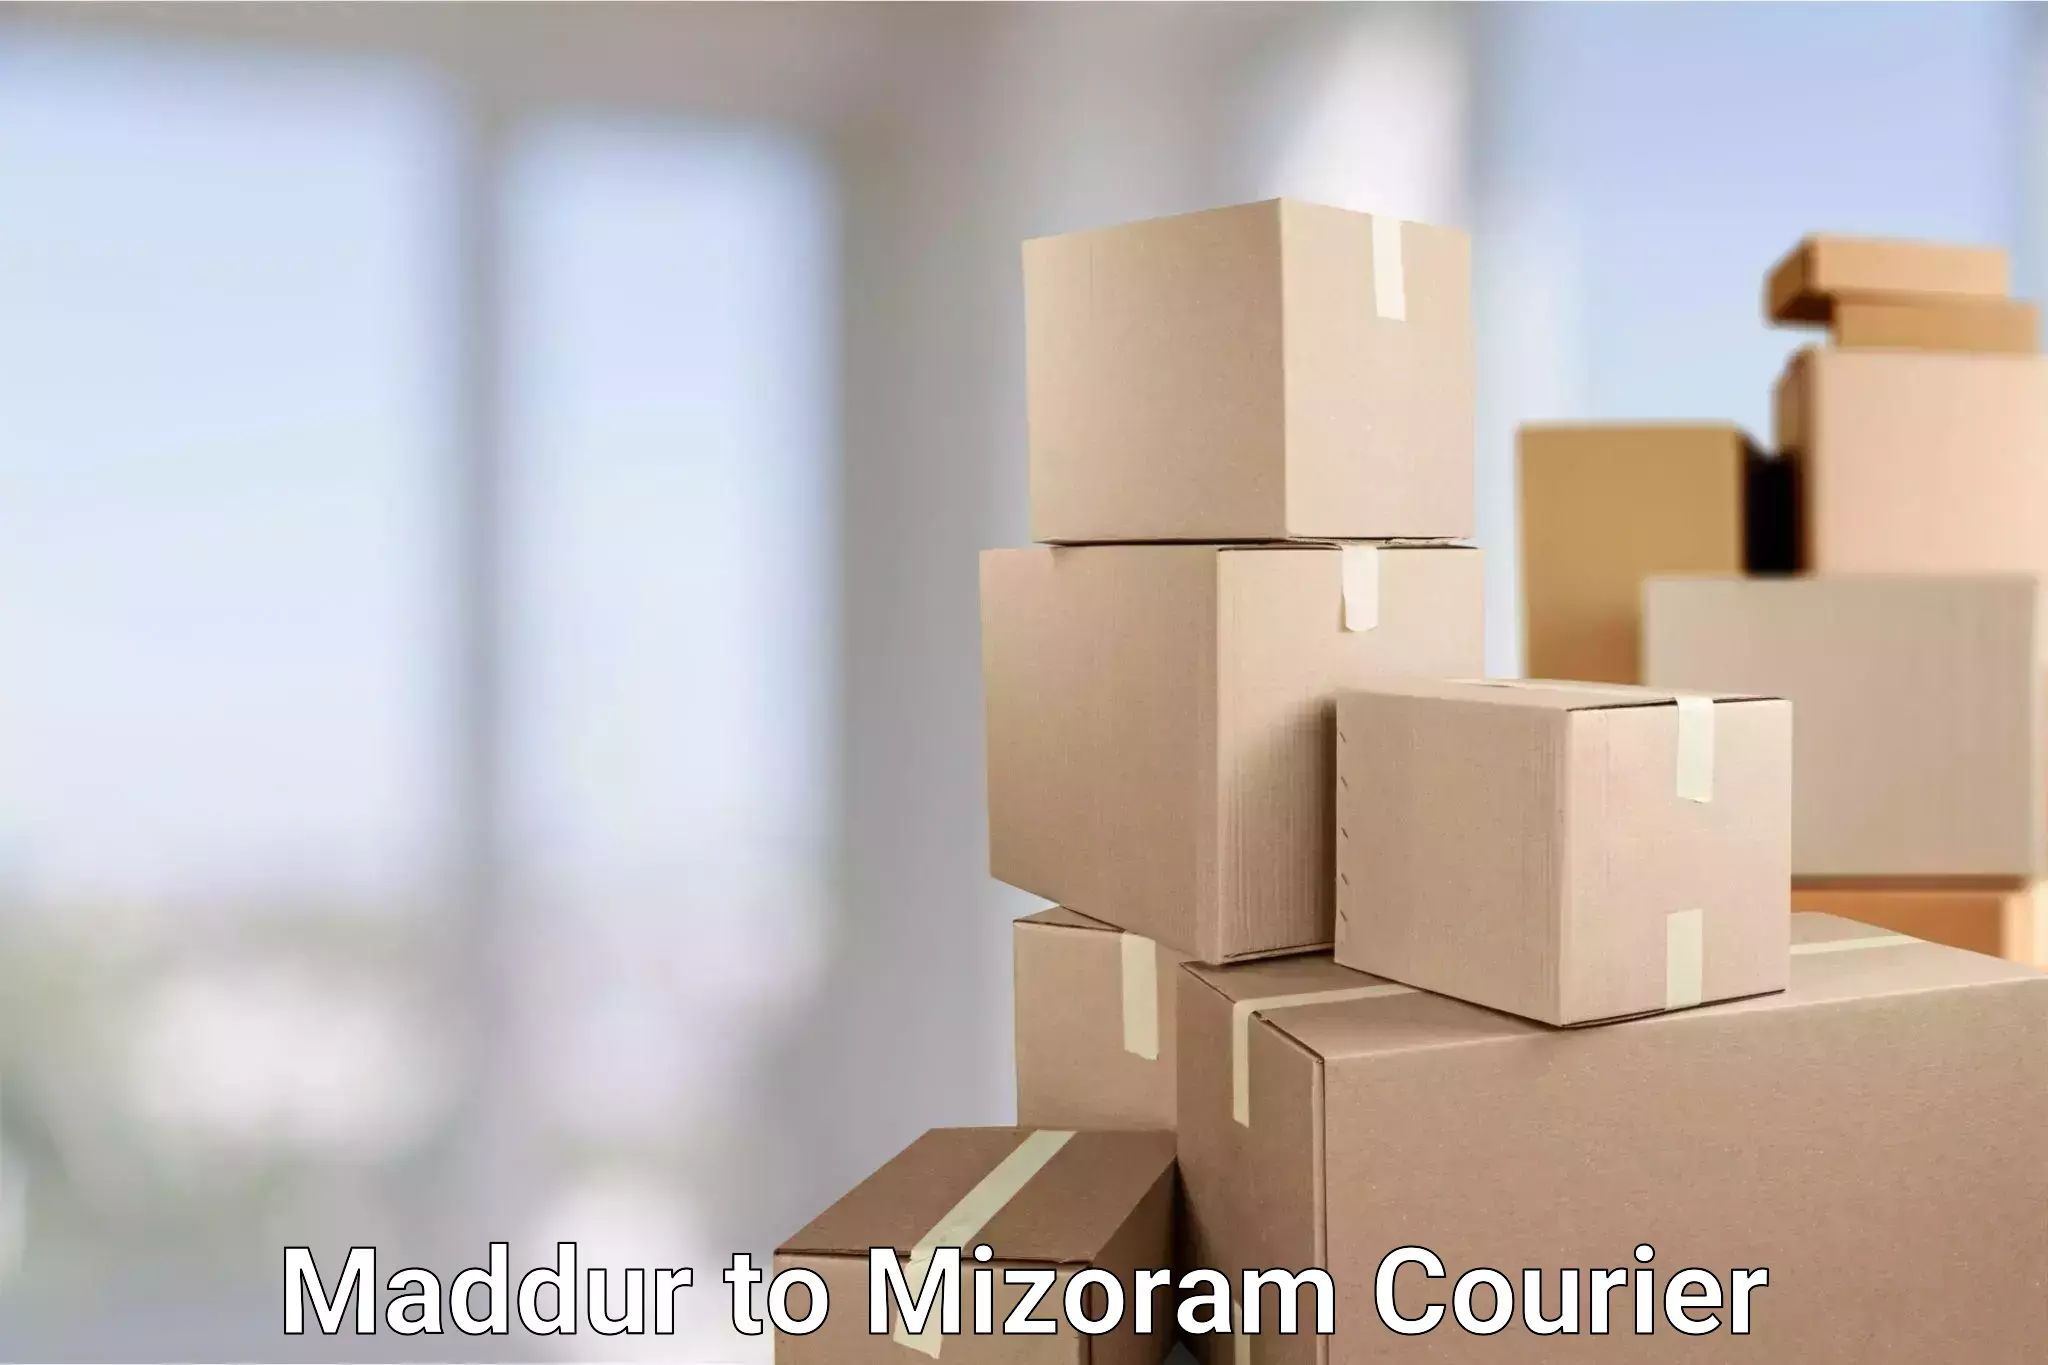 Reliable courier services in Maddur to Mizoram